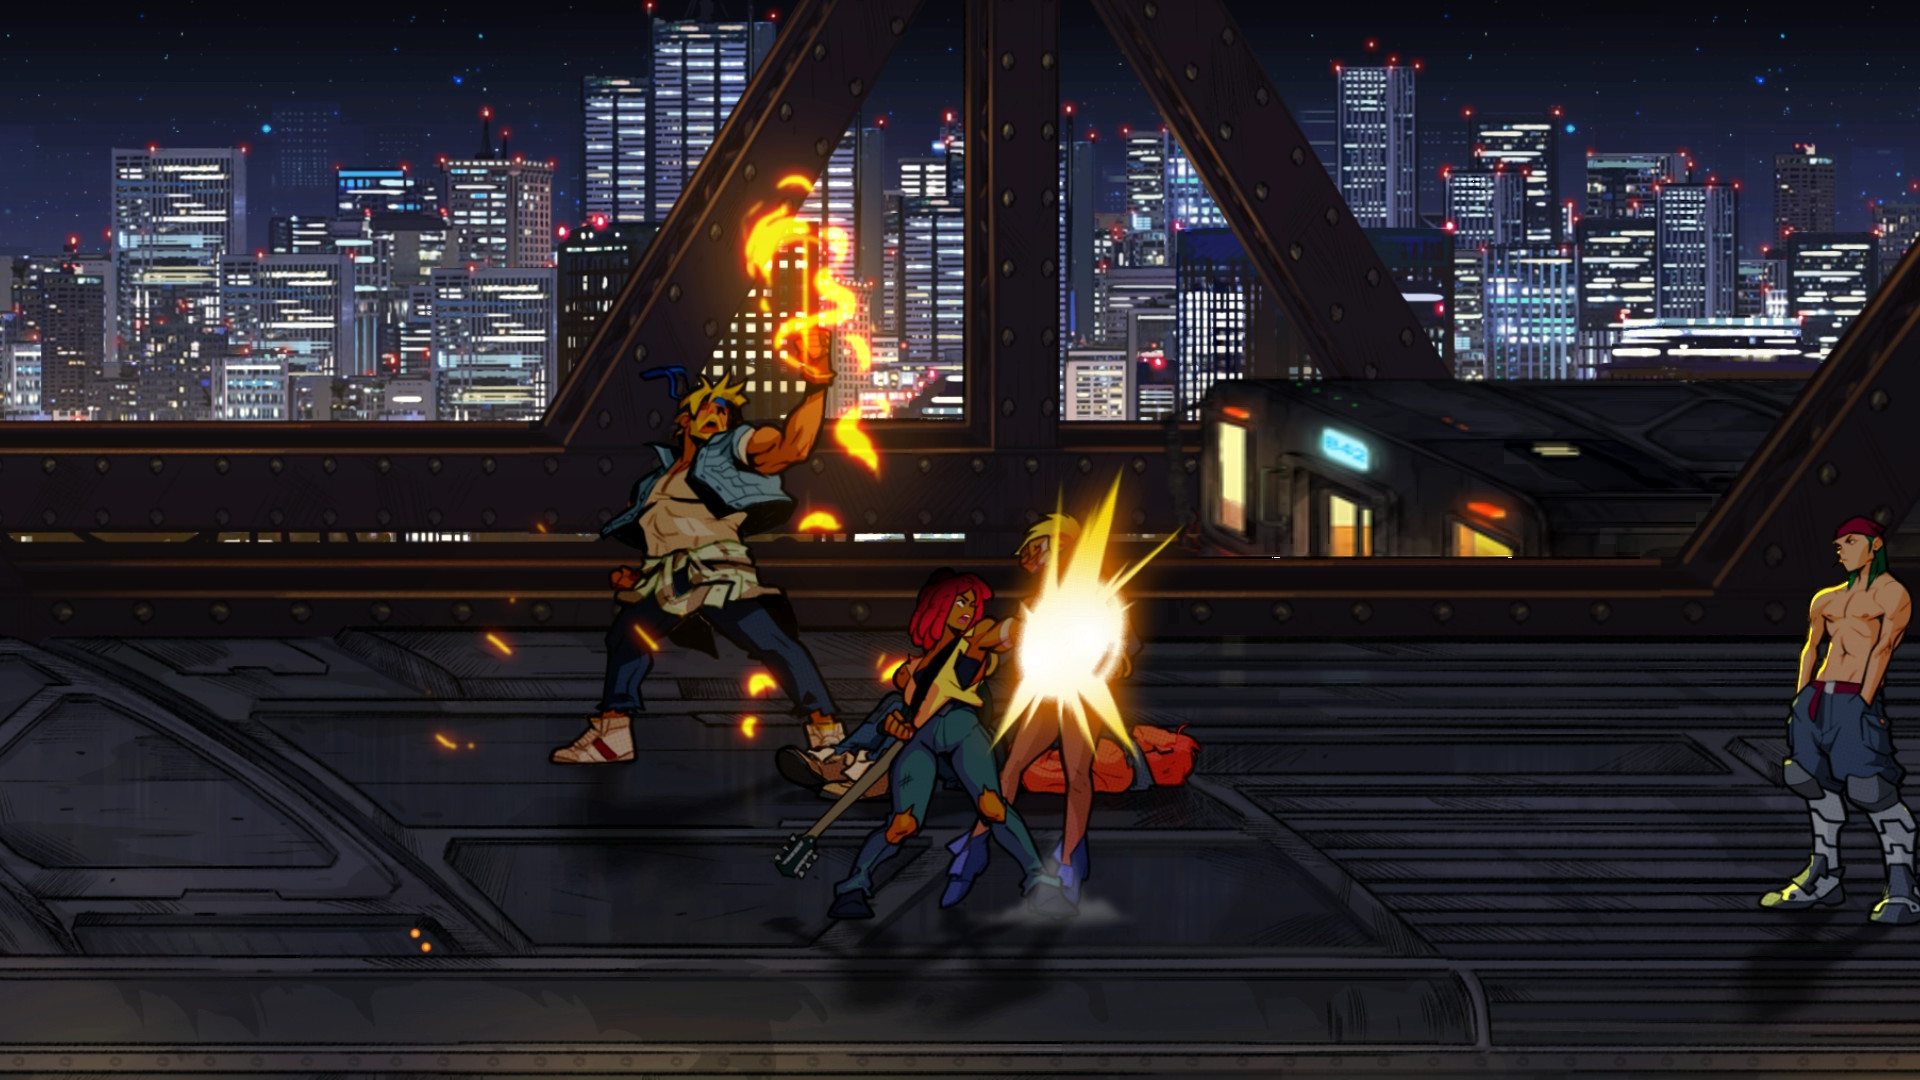 Streets of Rage 4 Free Download